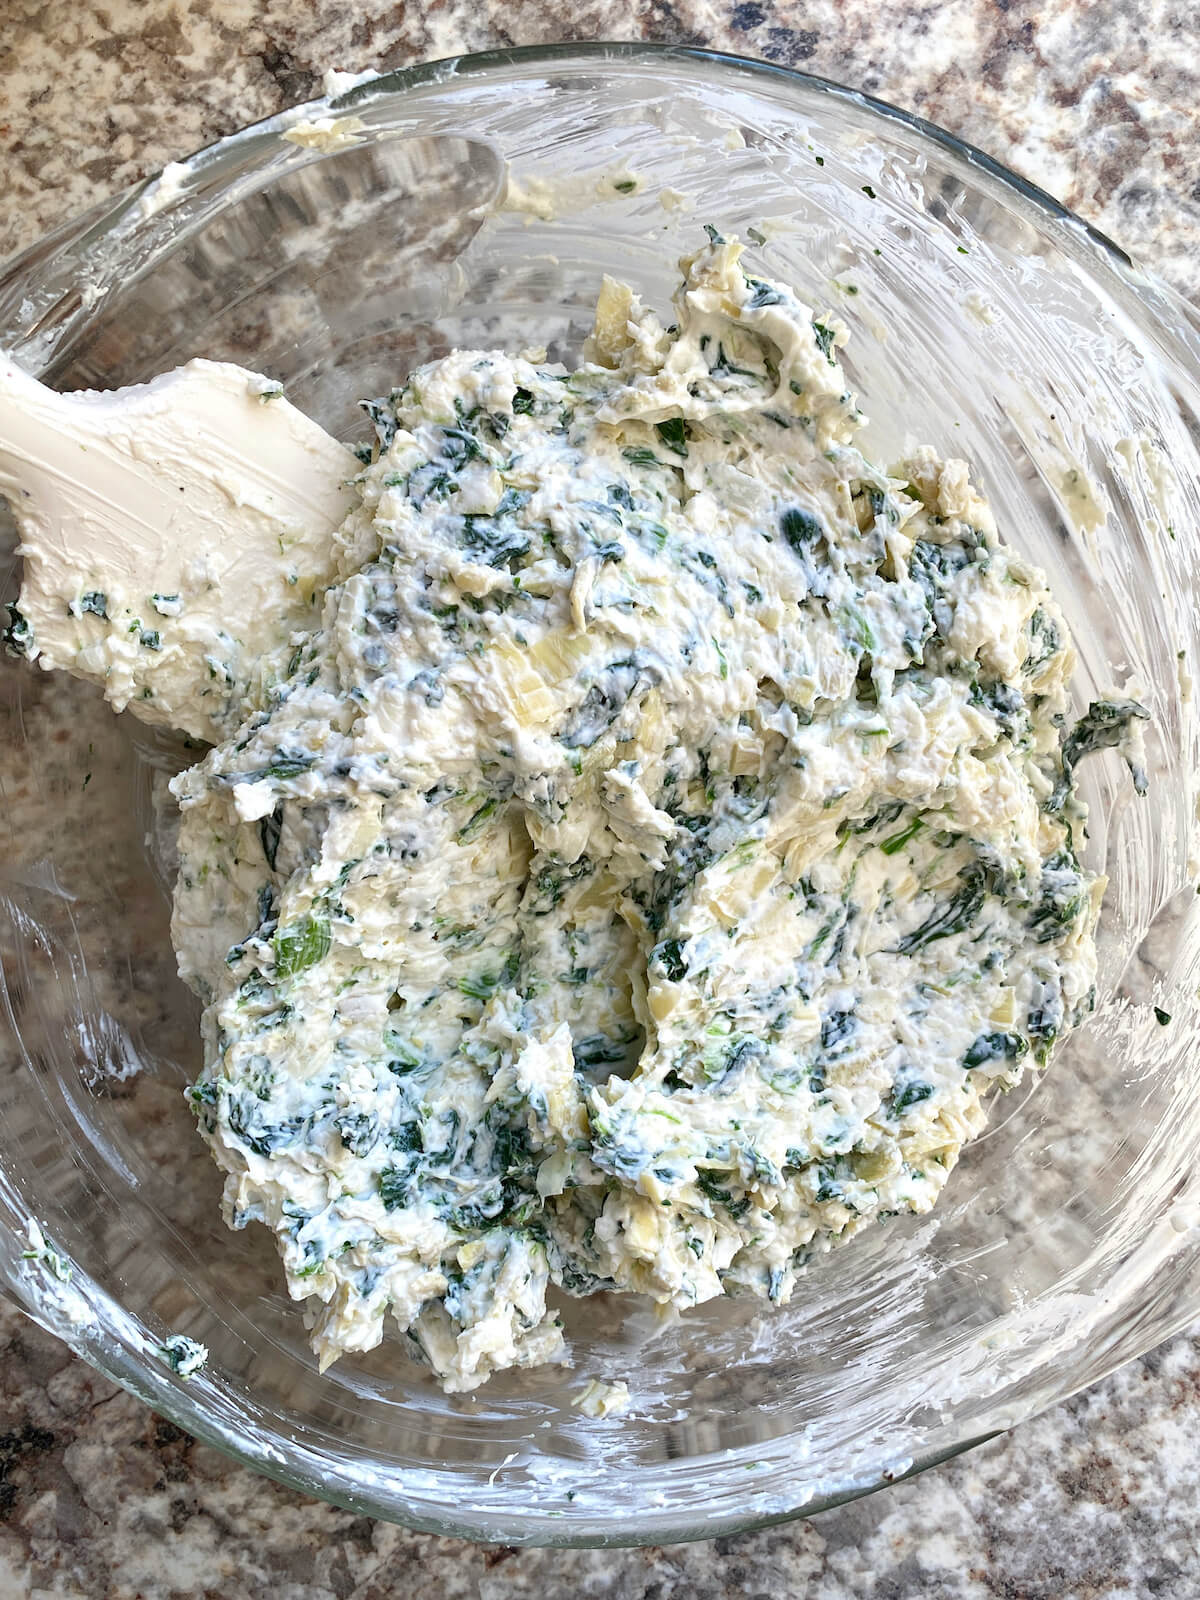 Spinach and artichokes mixed into the cream cheese dip base.